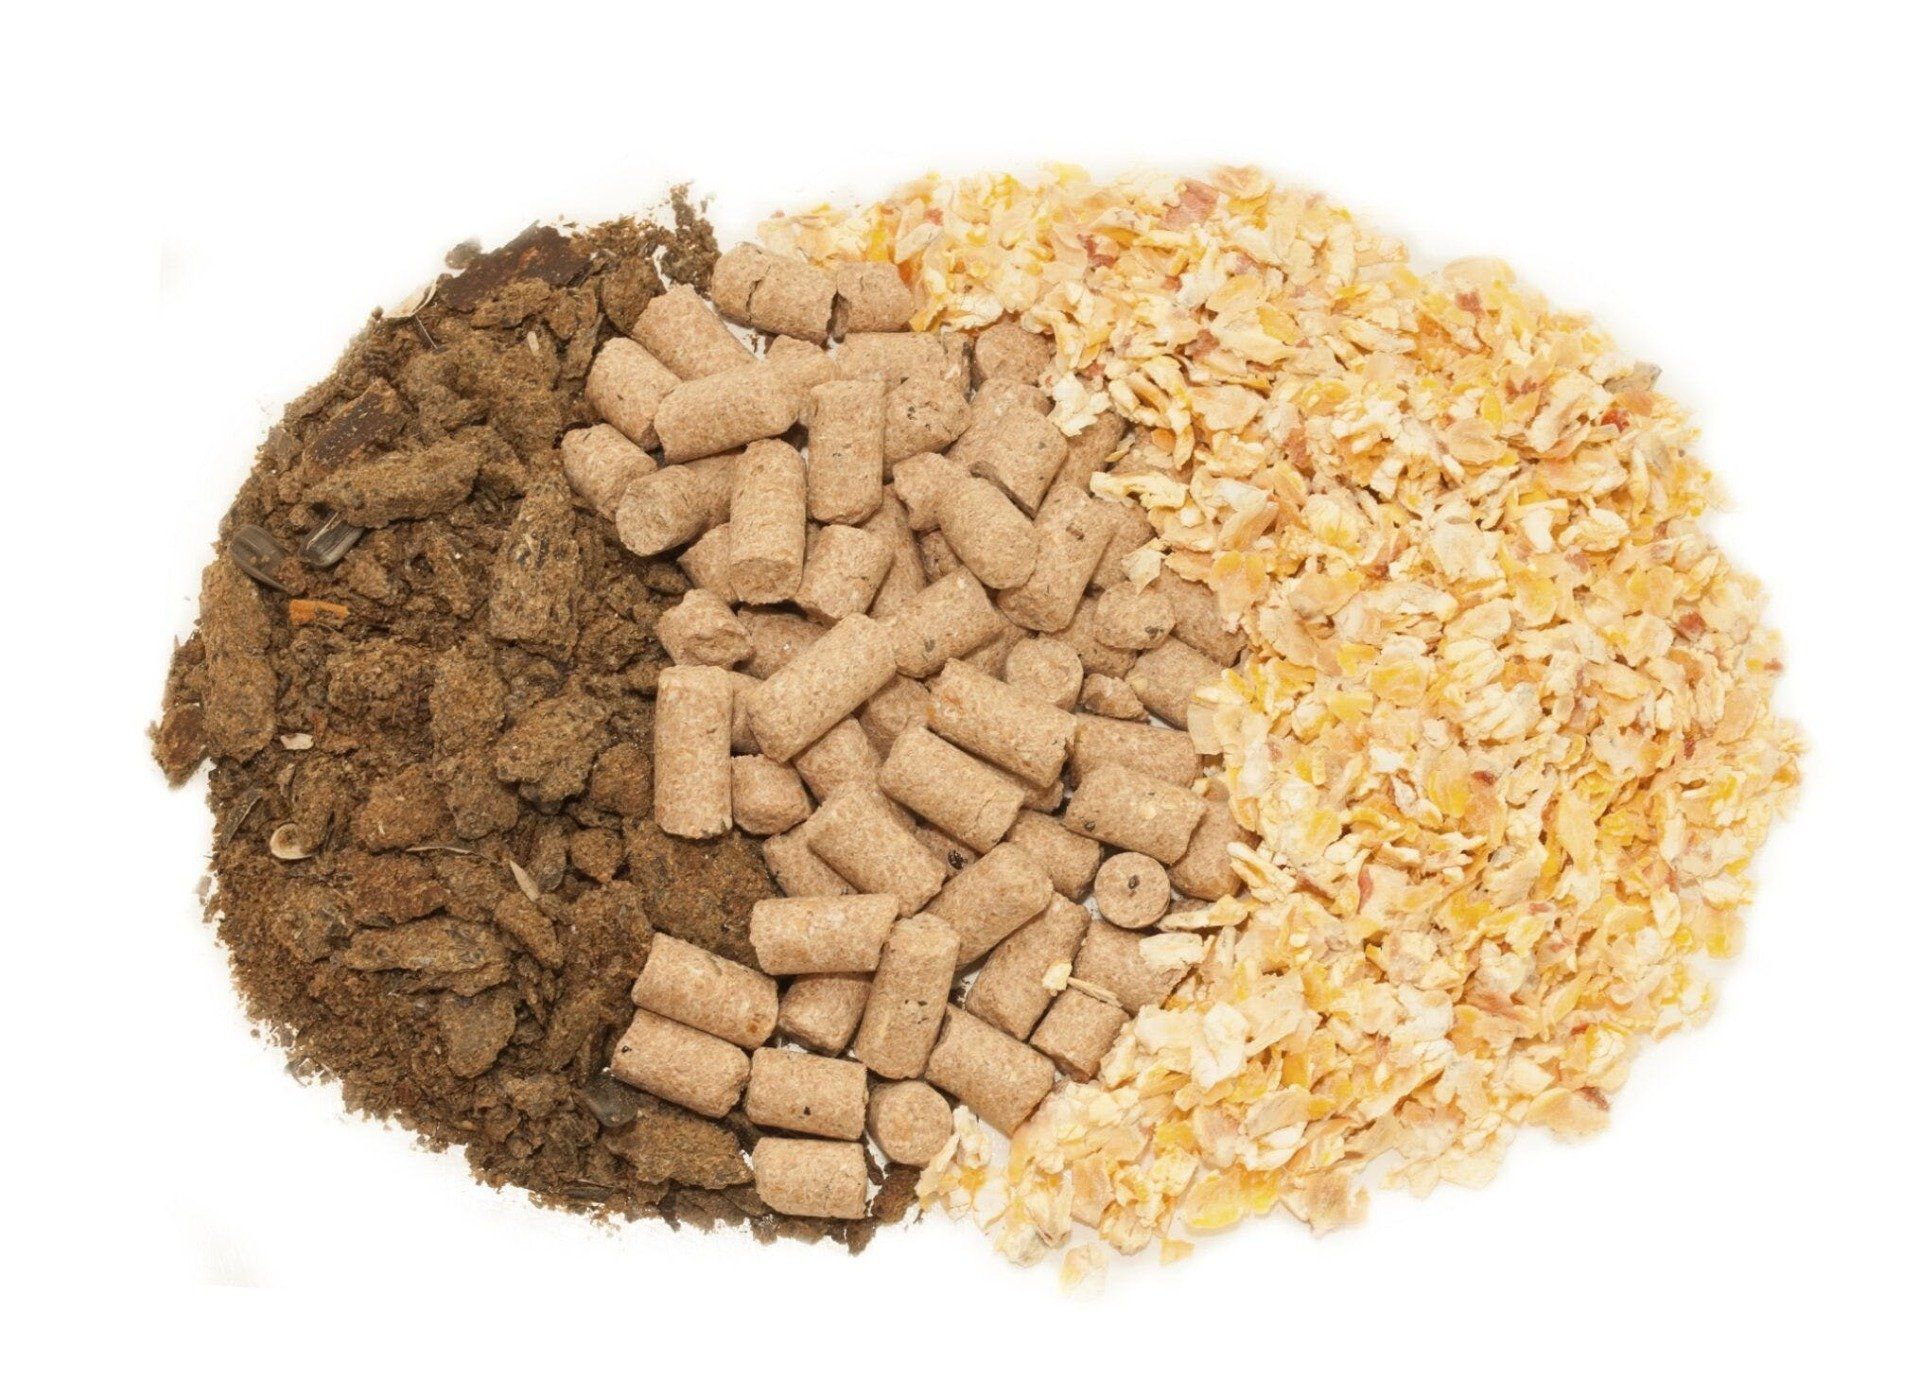 a pile of different types of food including pellets and corn flakes